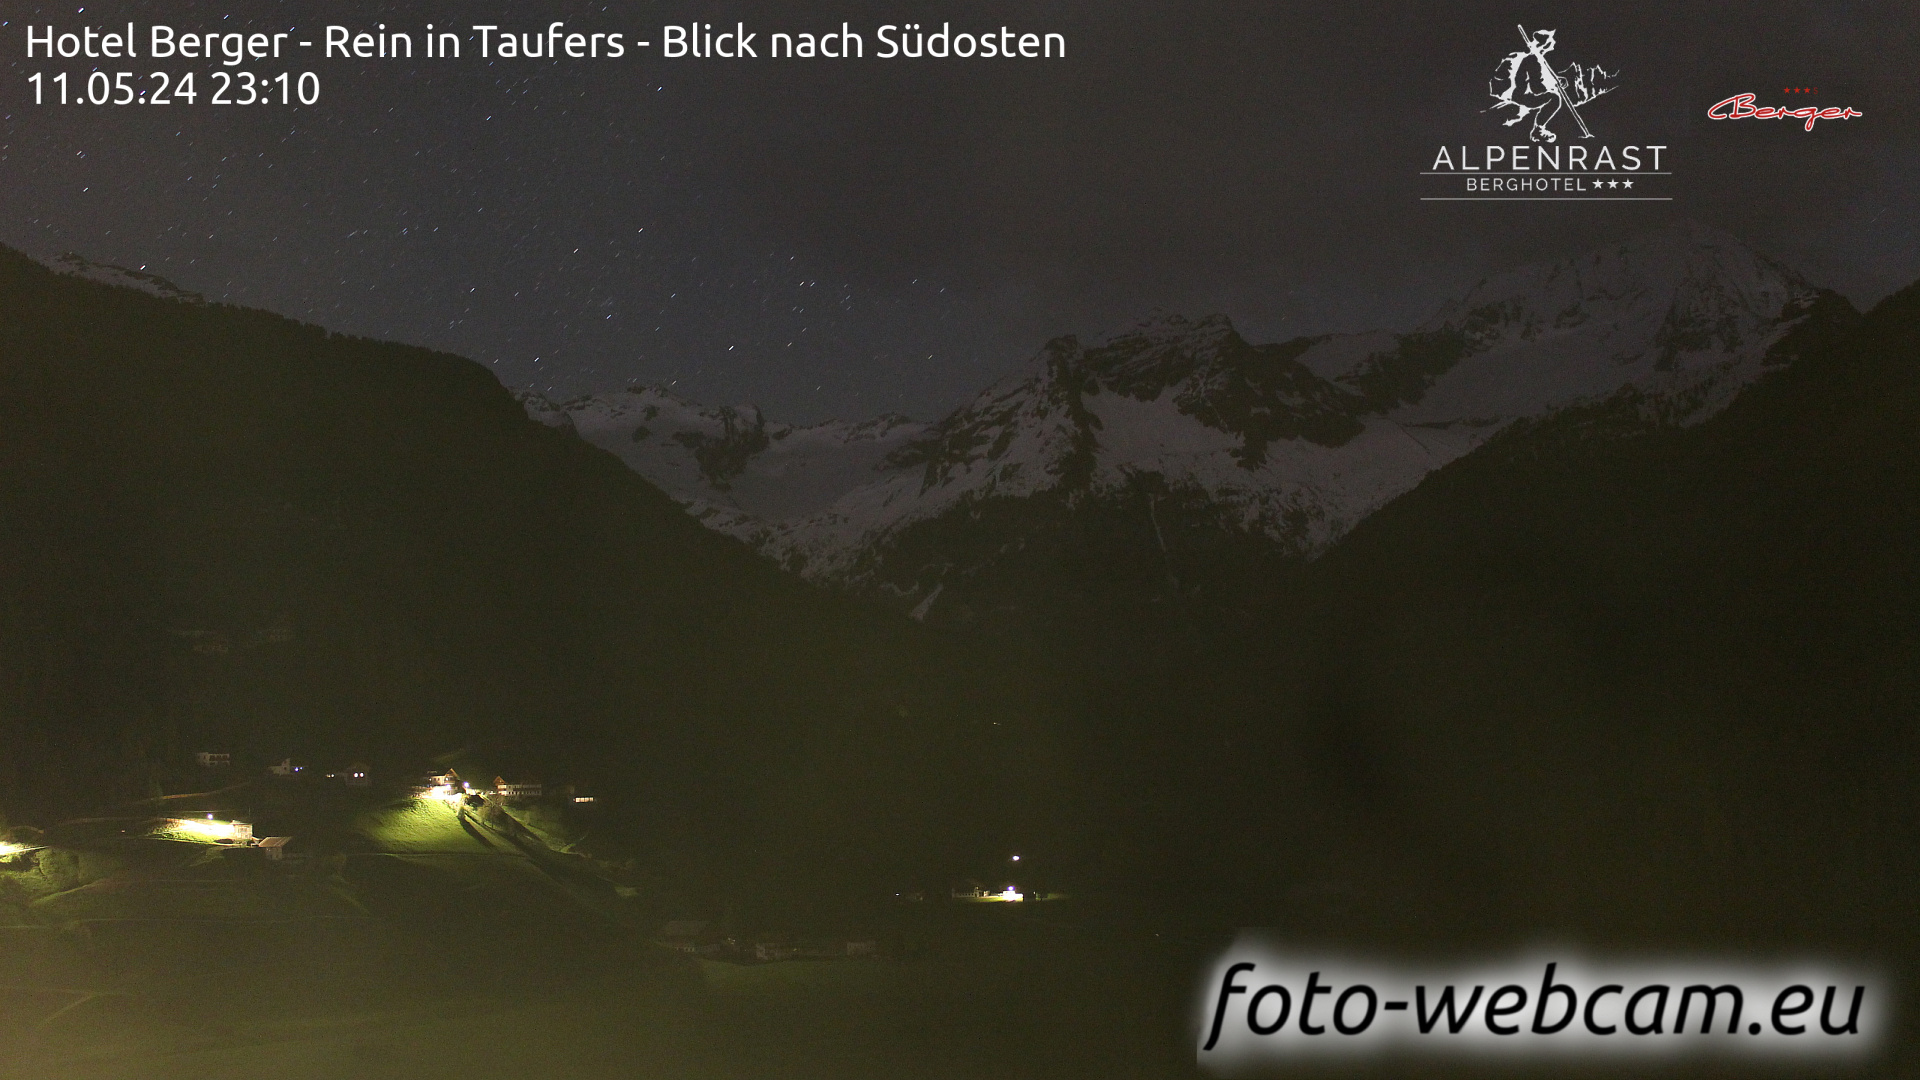 Rein in Taufers Do. 23:11